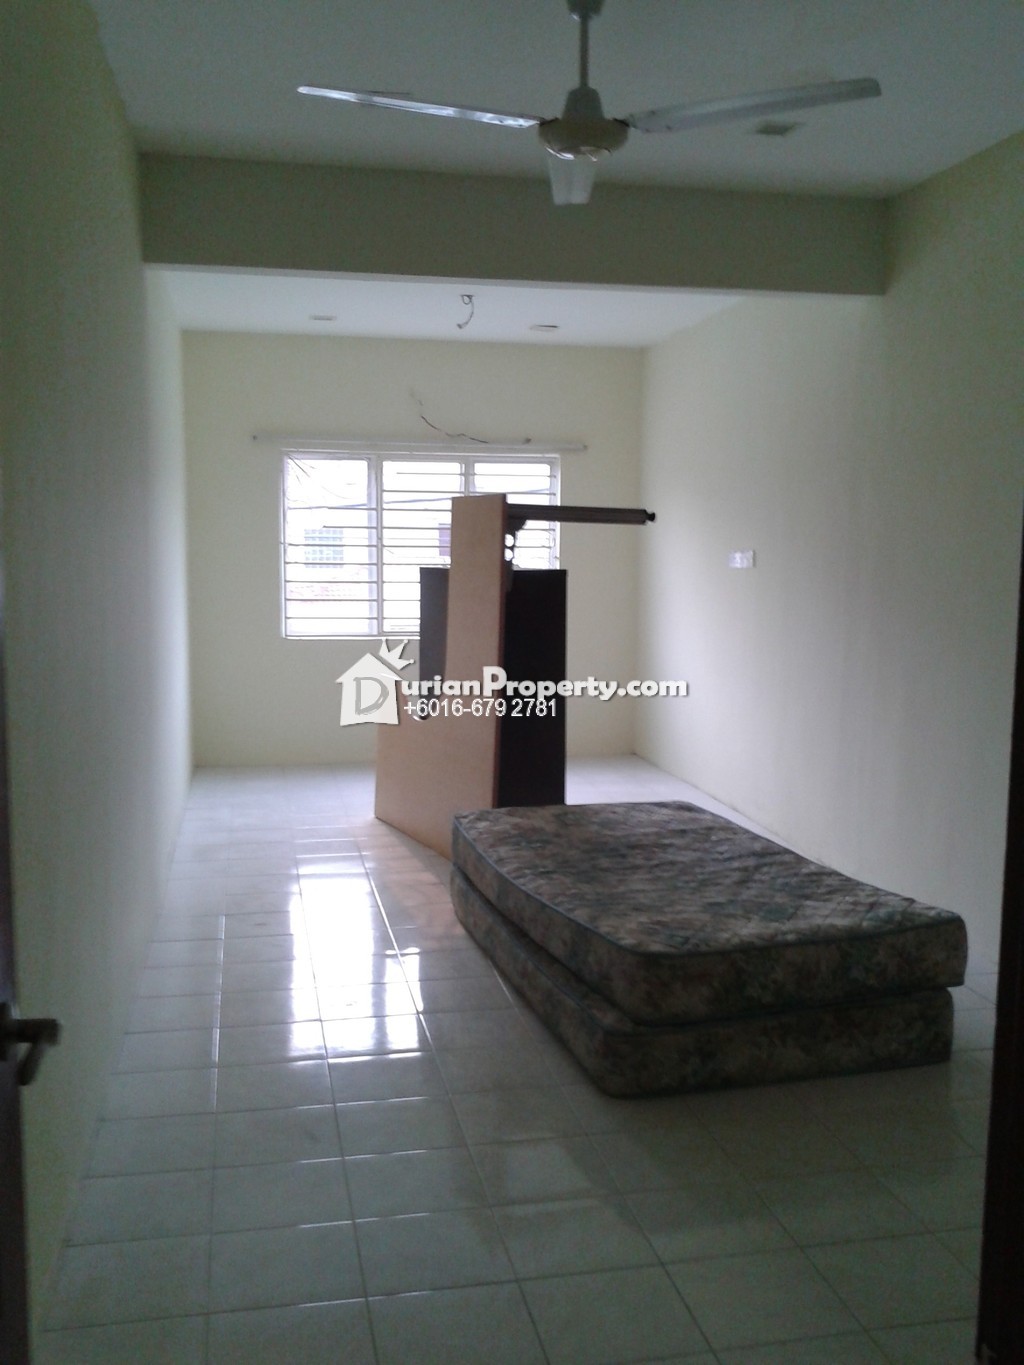 Terrace House For Sale At Taman Berkeley Klang For Rm 699 000 By